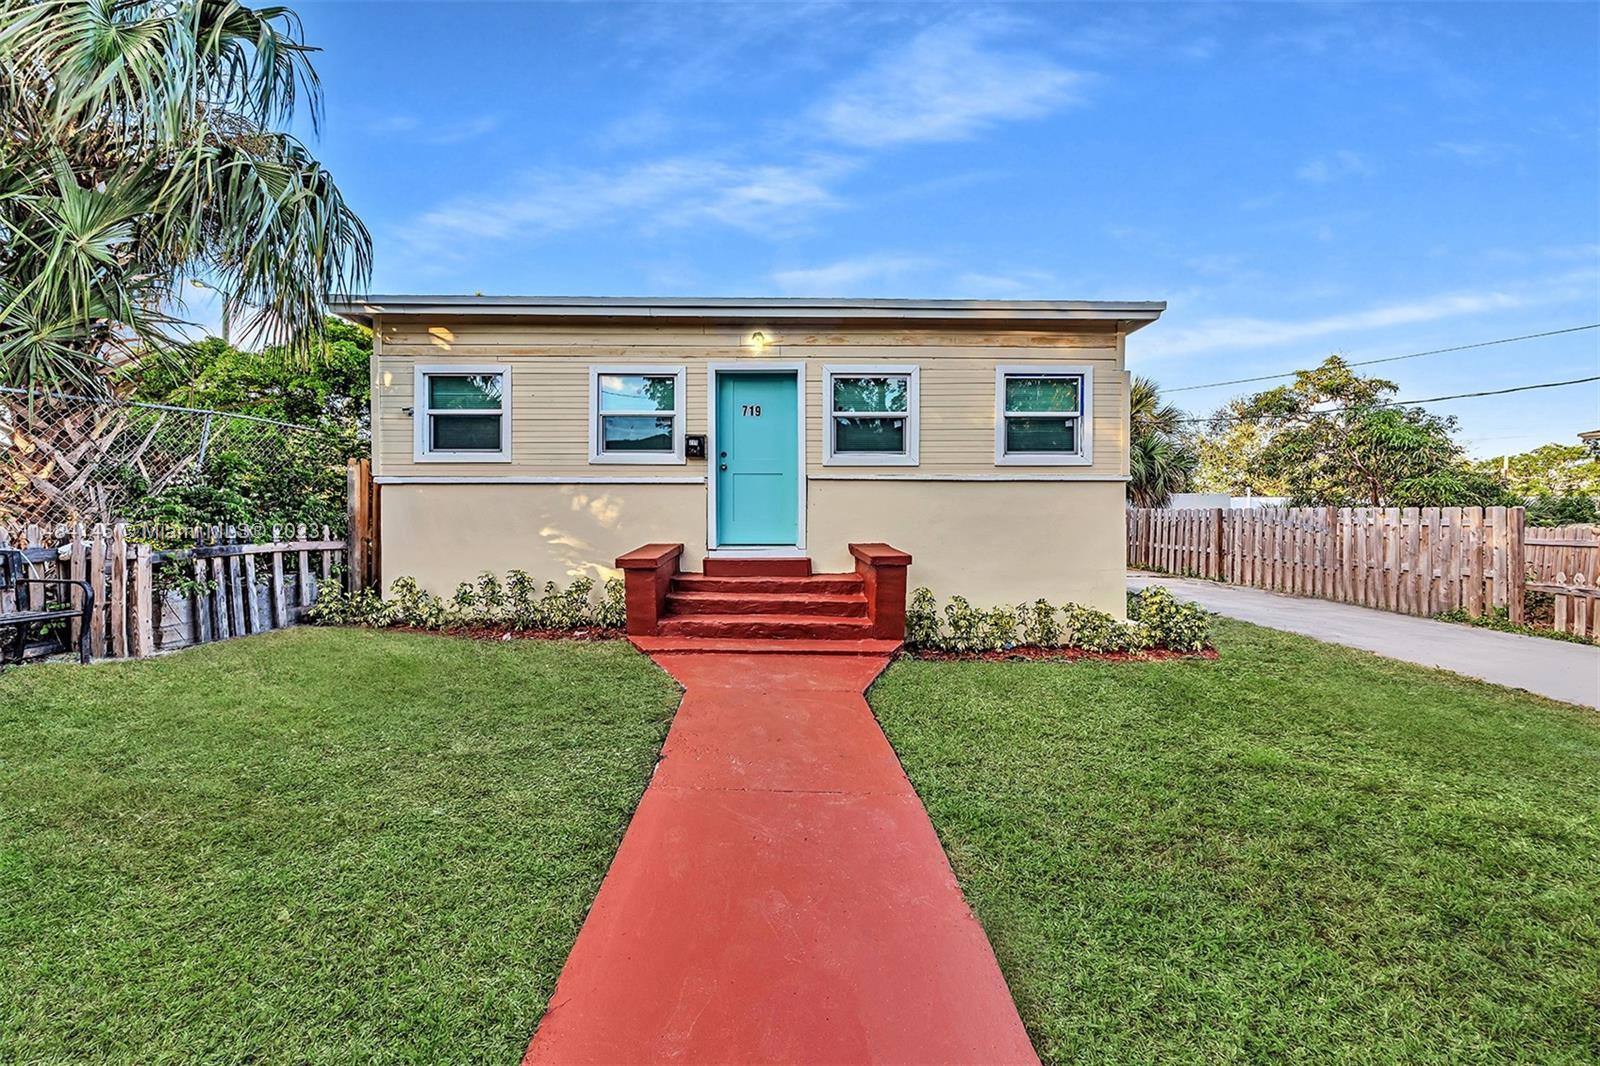 FULLY REMODELED 4/3 SINGLE-FAMILY HOME, BOOSTING 1700 SQF IN THE GREAT UPCOMING DOWNTOWN WPB AREA. T